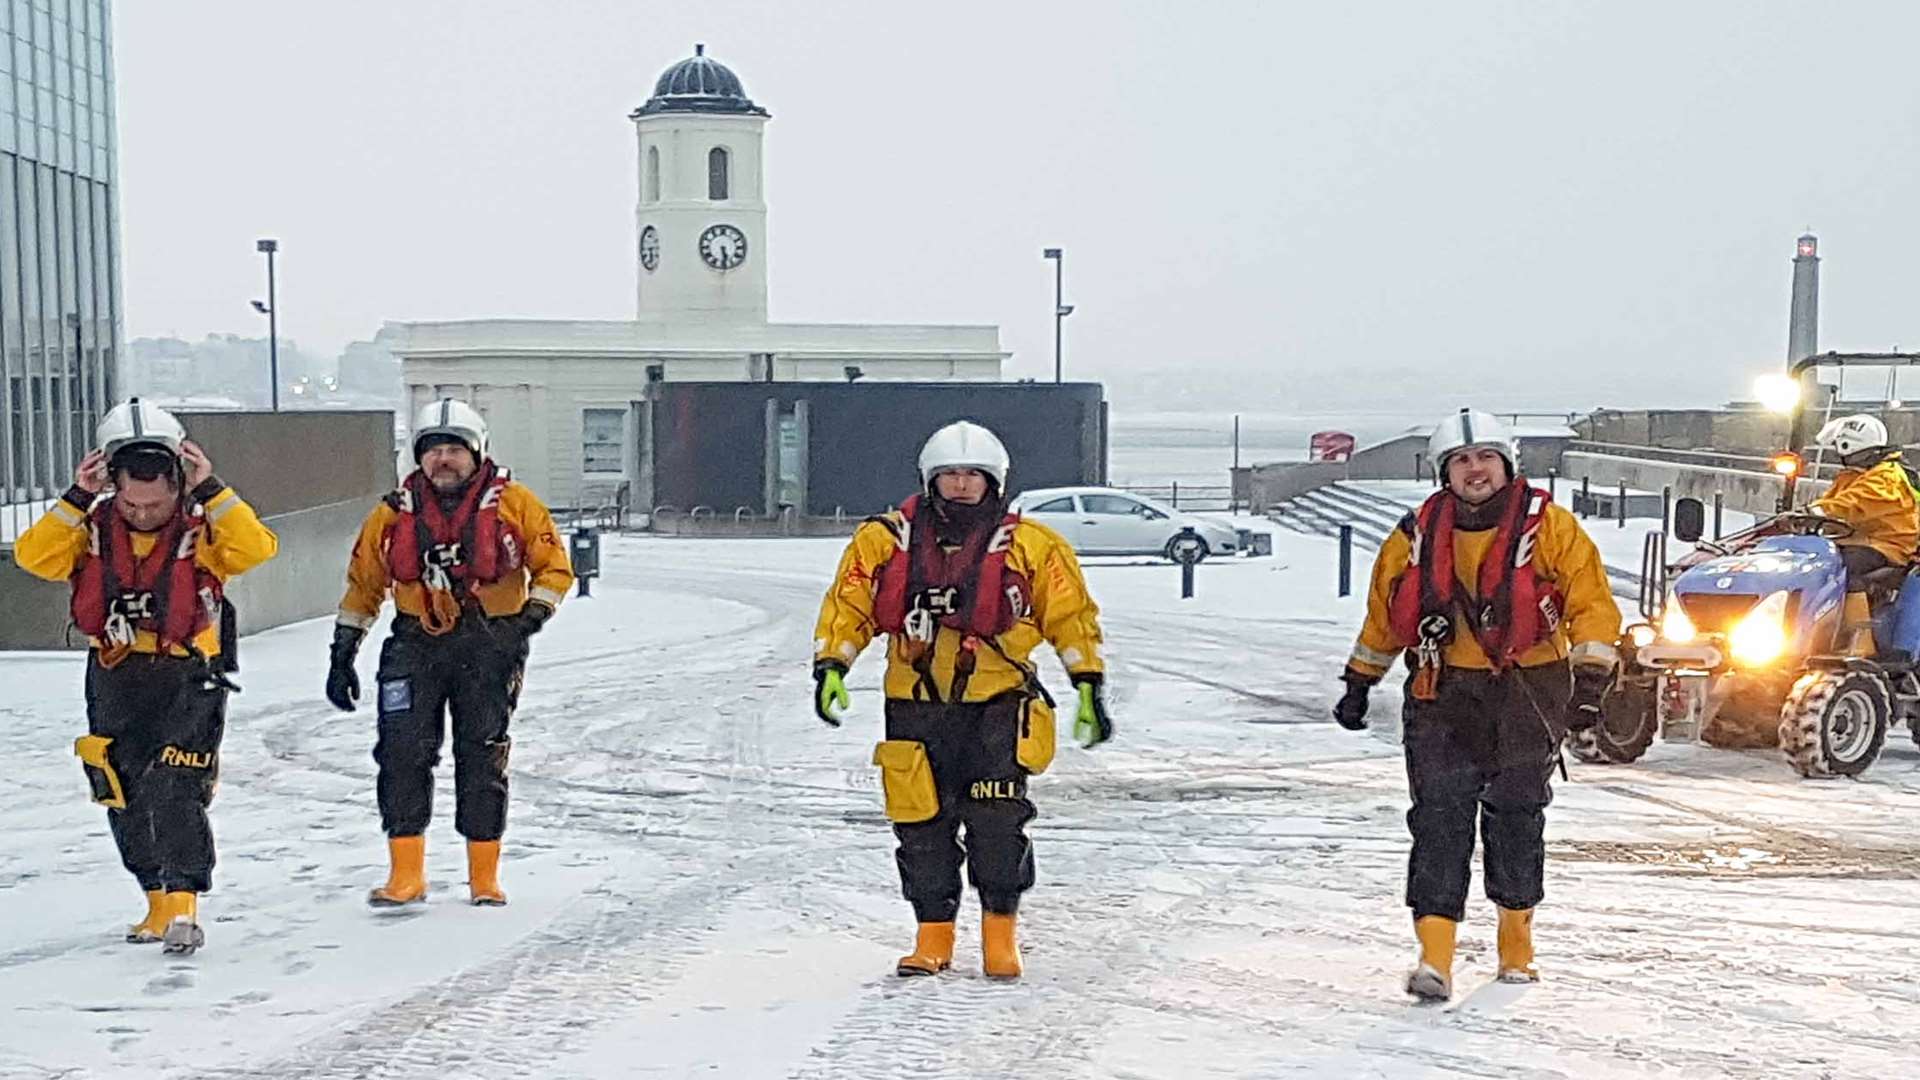 Margate's lifeboat crew safely back after the call in atrocious weather conditions